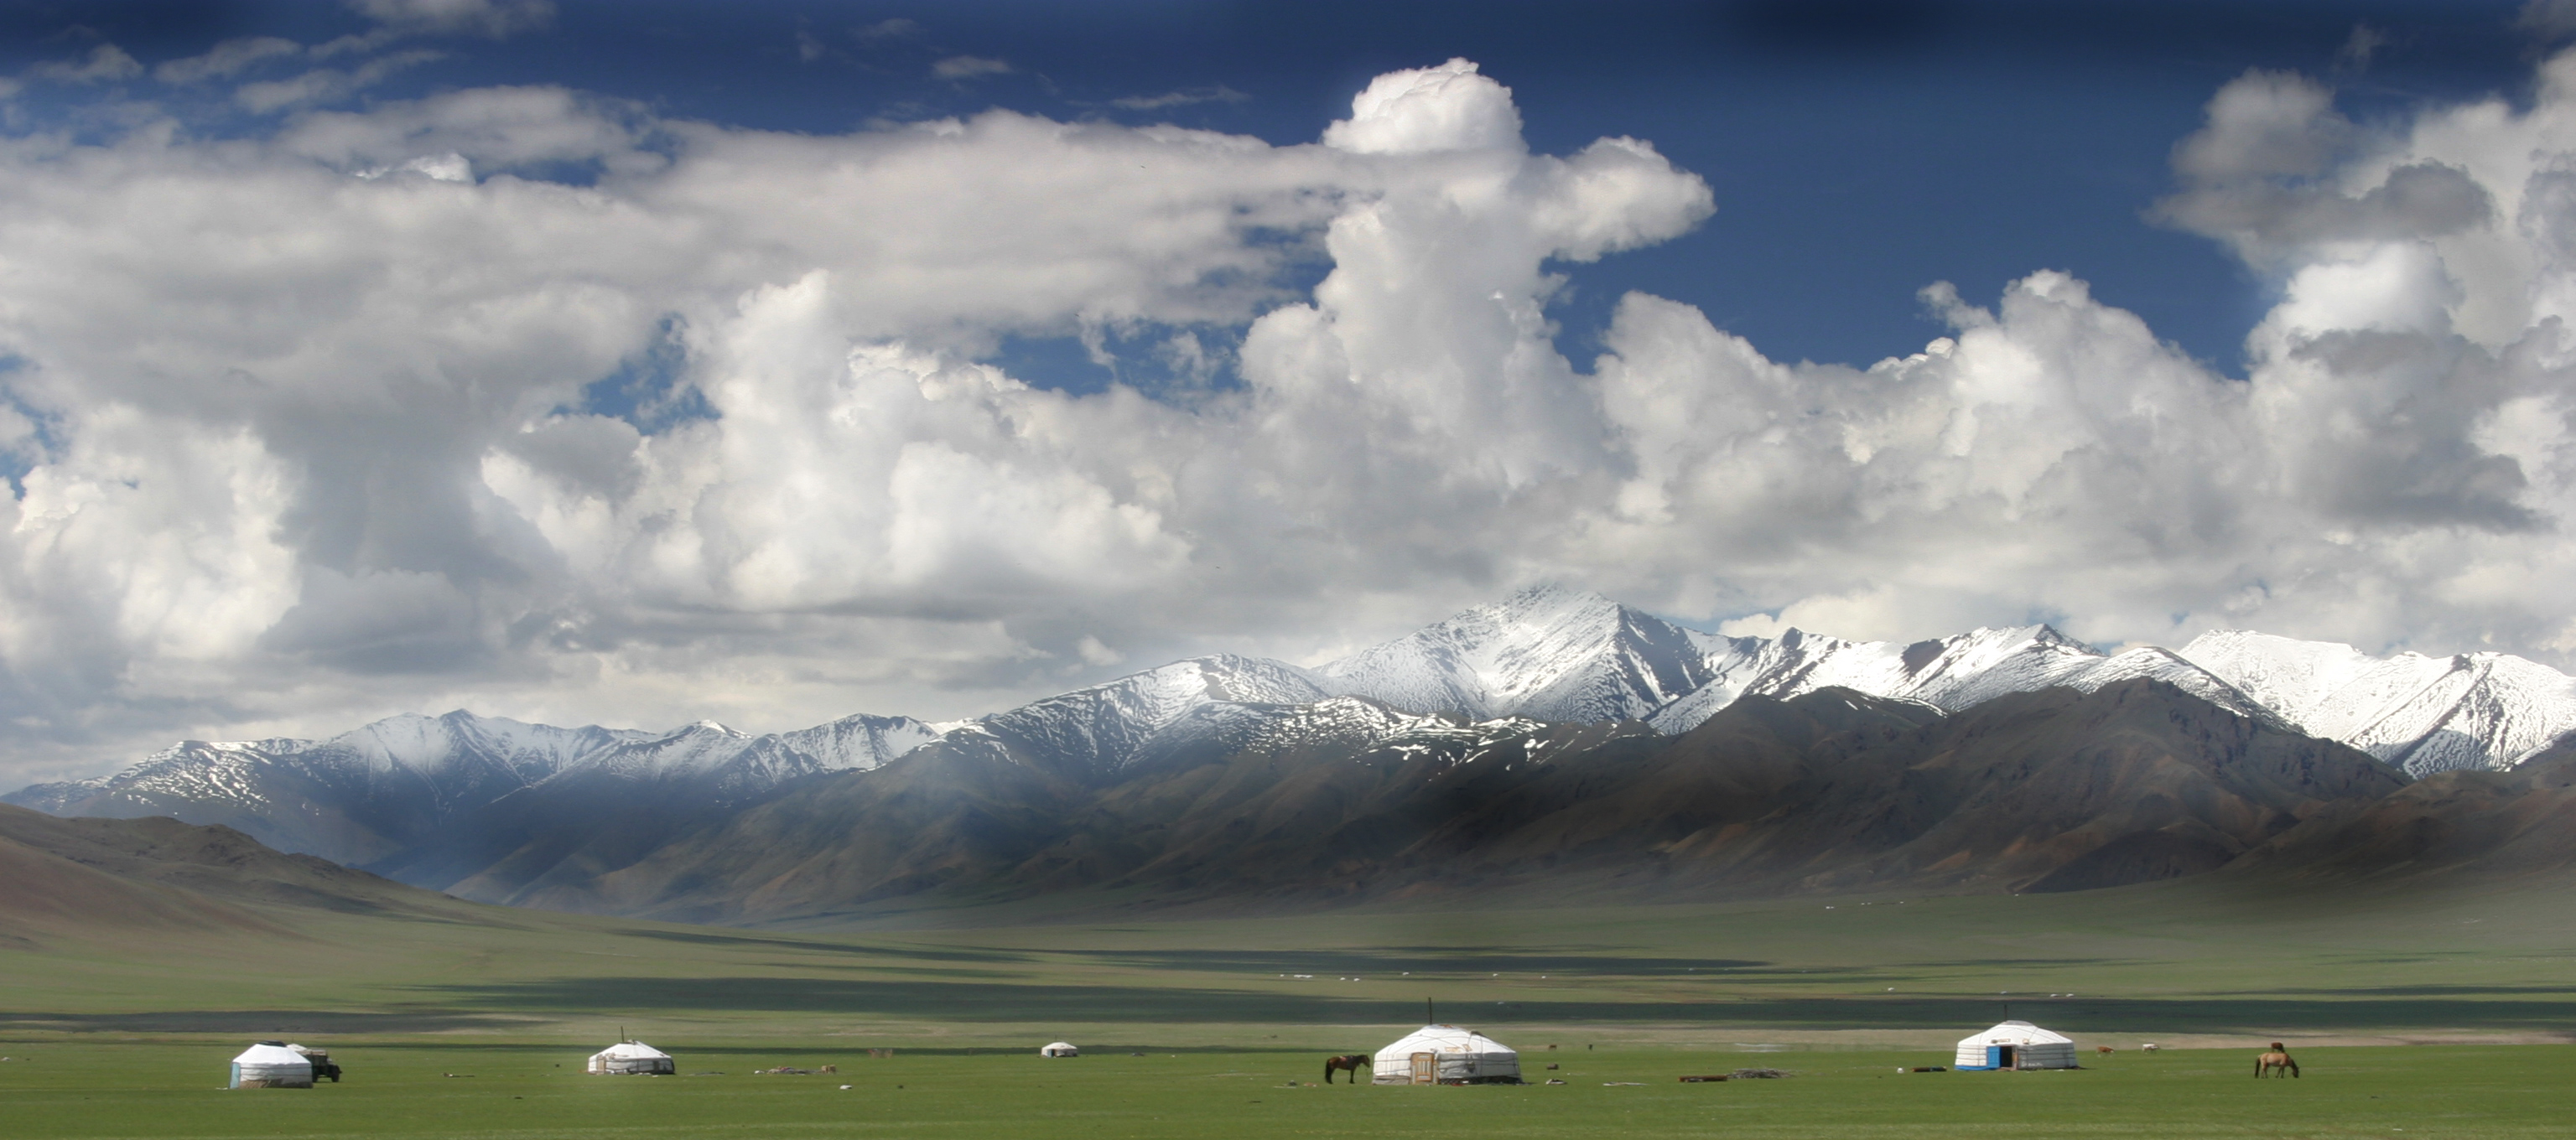 Yurts dotting a grassy plain against the backdrop of a mountain range.